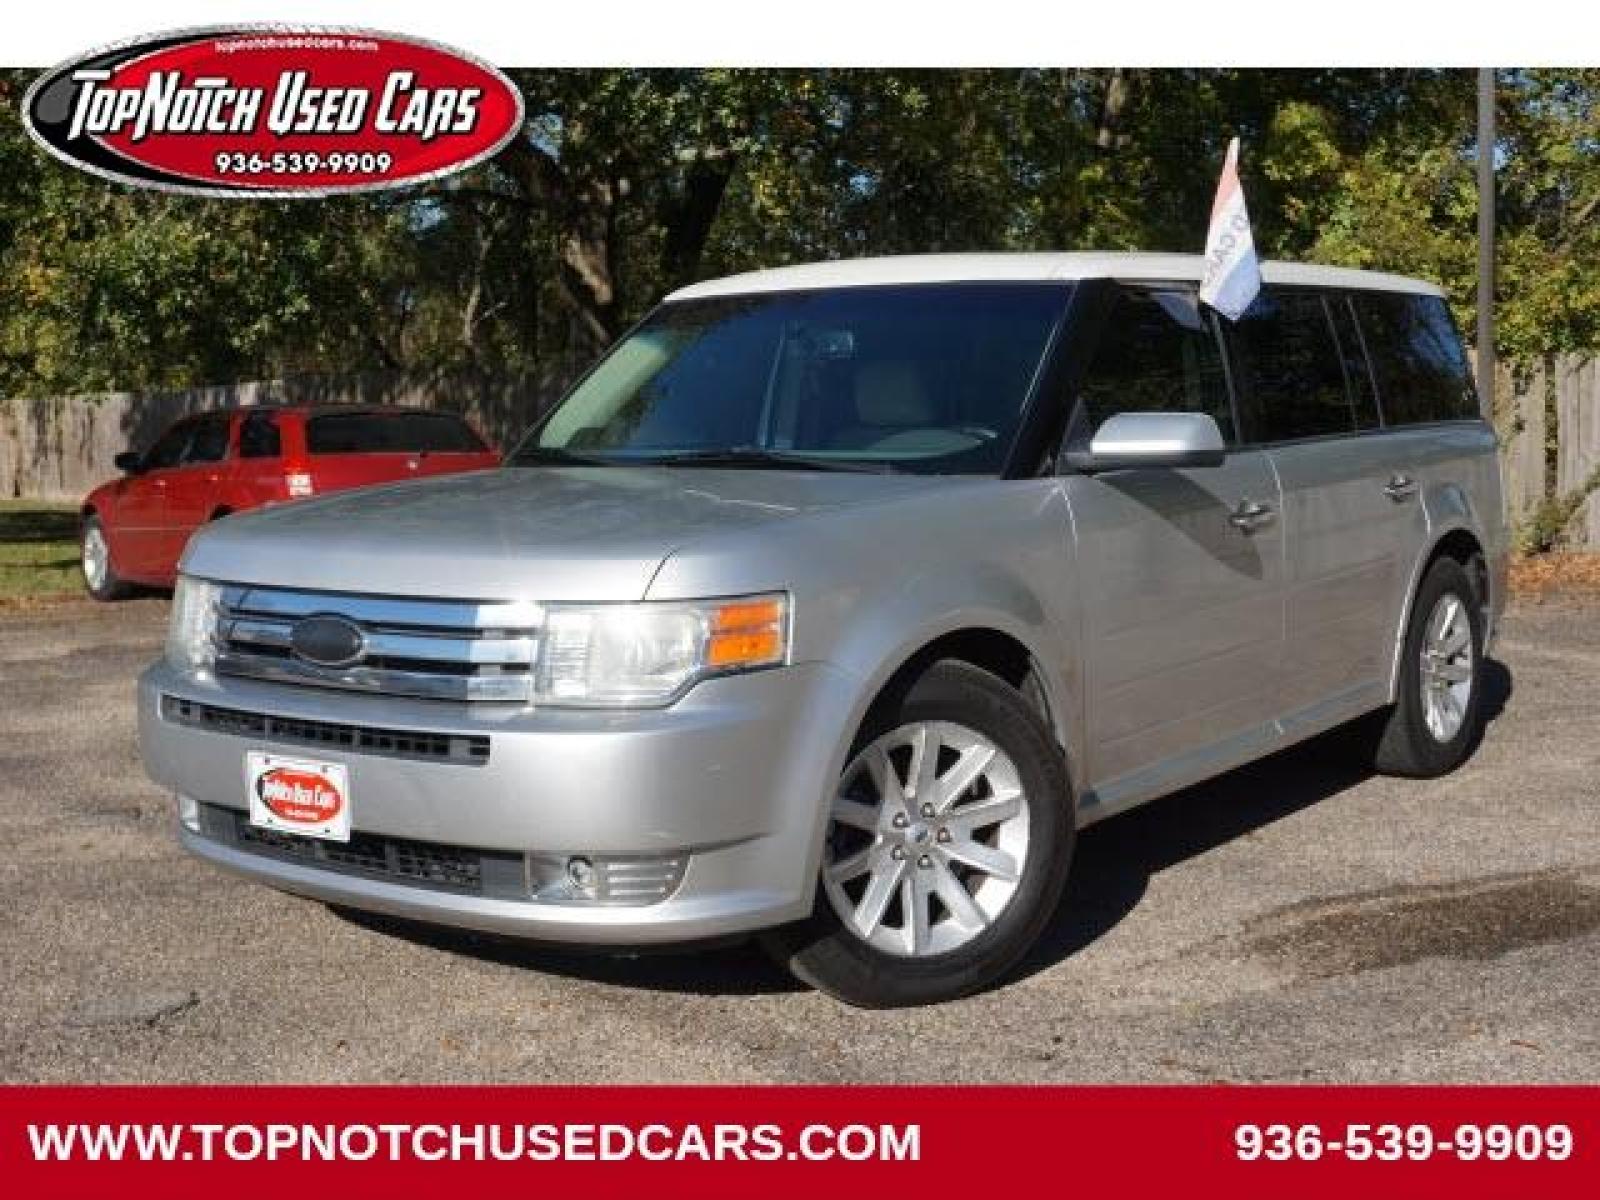 Top Notch Used Cars | Bad Credit Car Loan Specialists - 2012 Ford Flex  SPORT UTILITY 4-DR